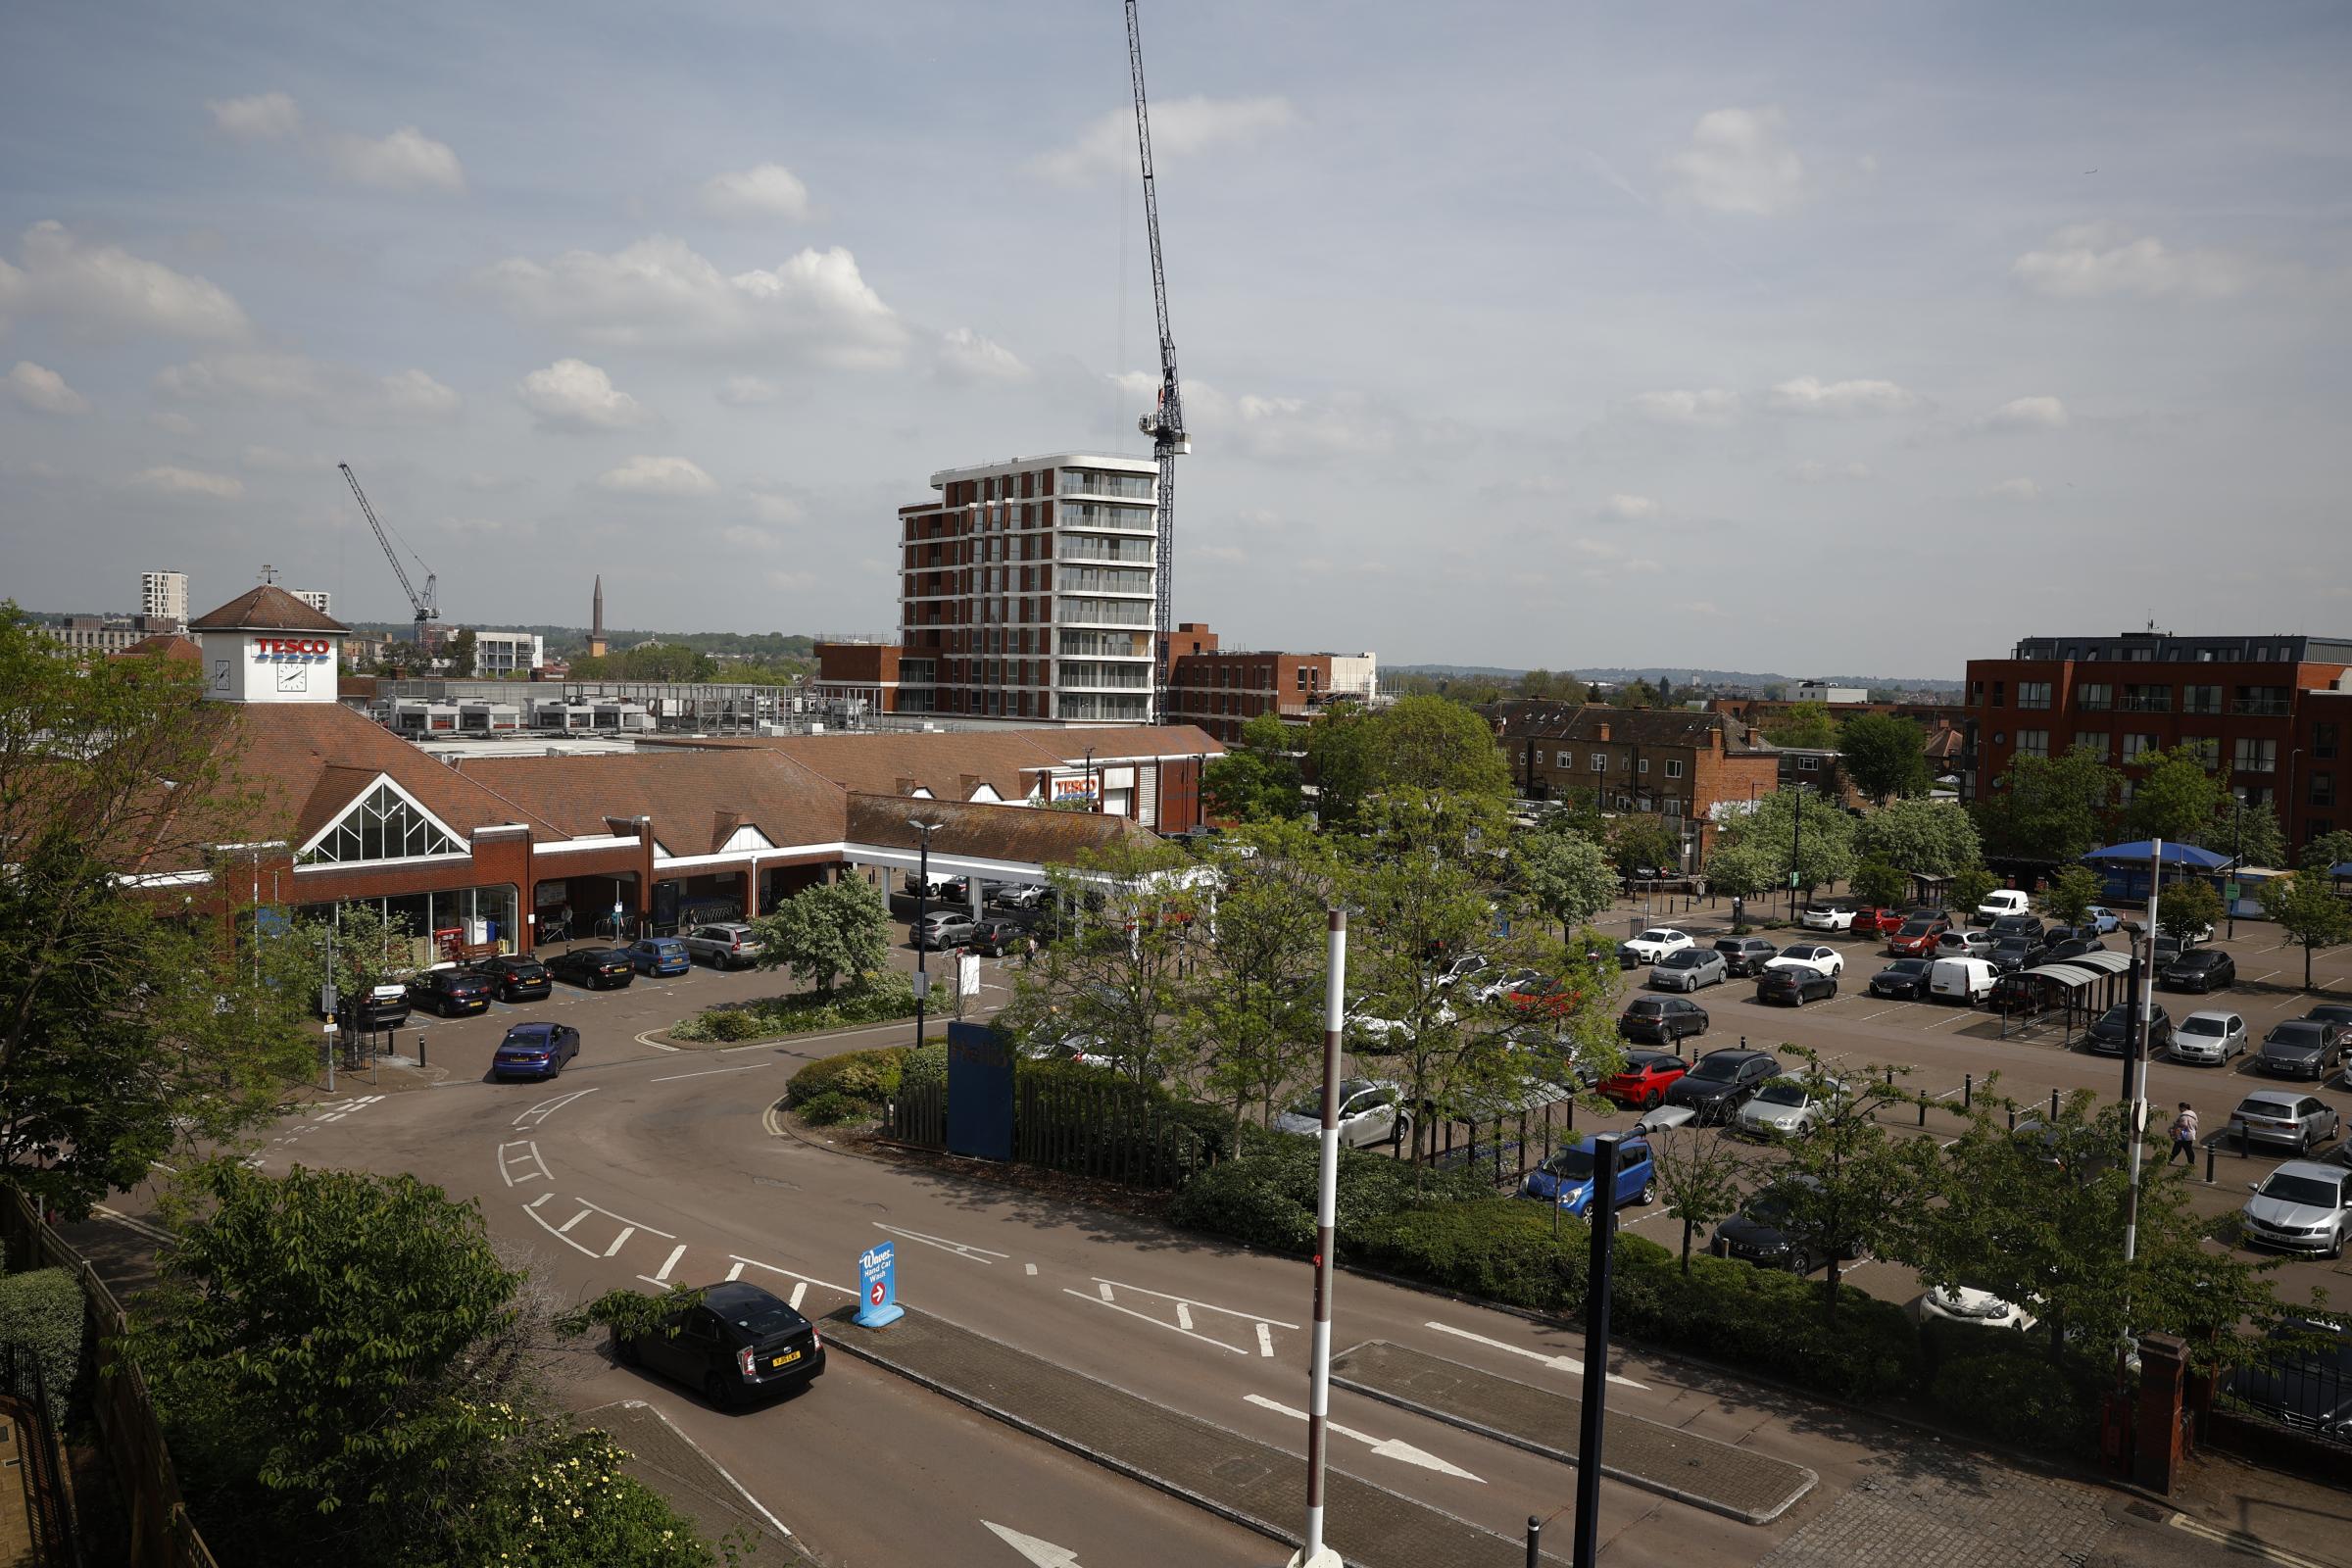 A general view of the Tesco next to the Rosen House pose for photos in north London in Britain 10 May 2024. Facundo Arrizabalaga/MyLondon.